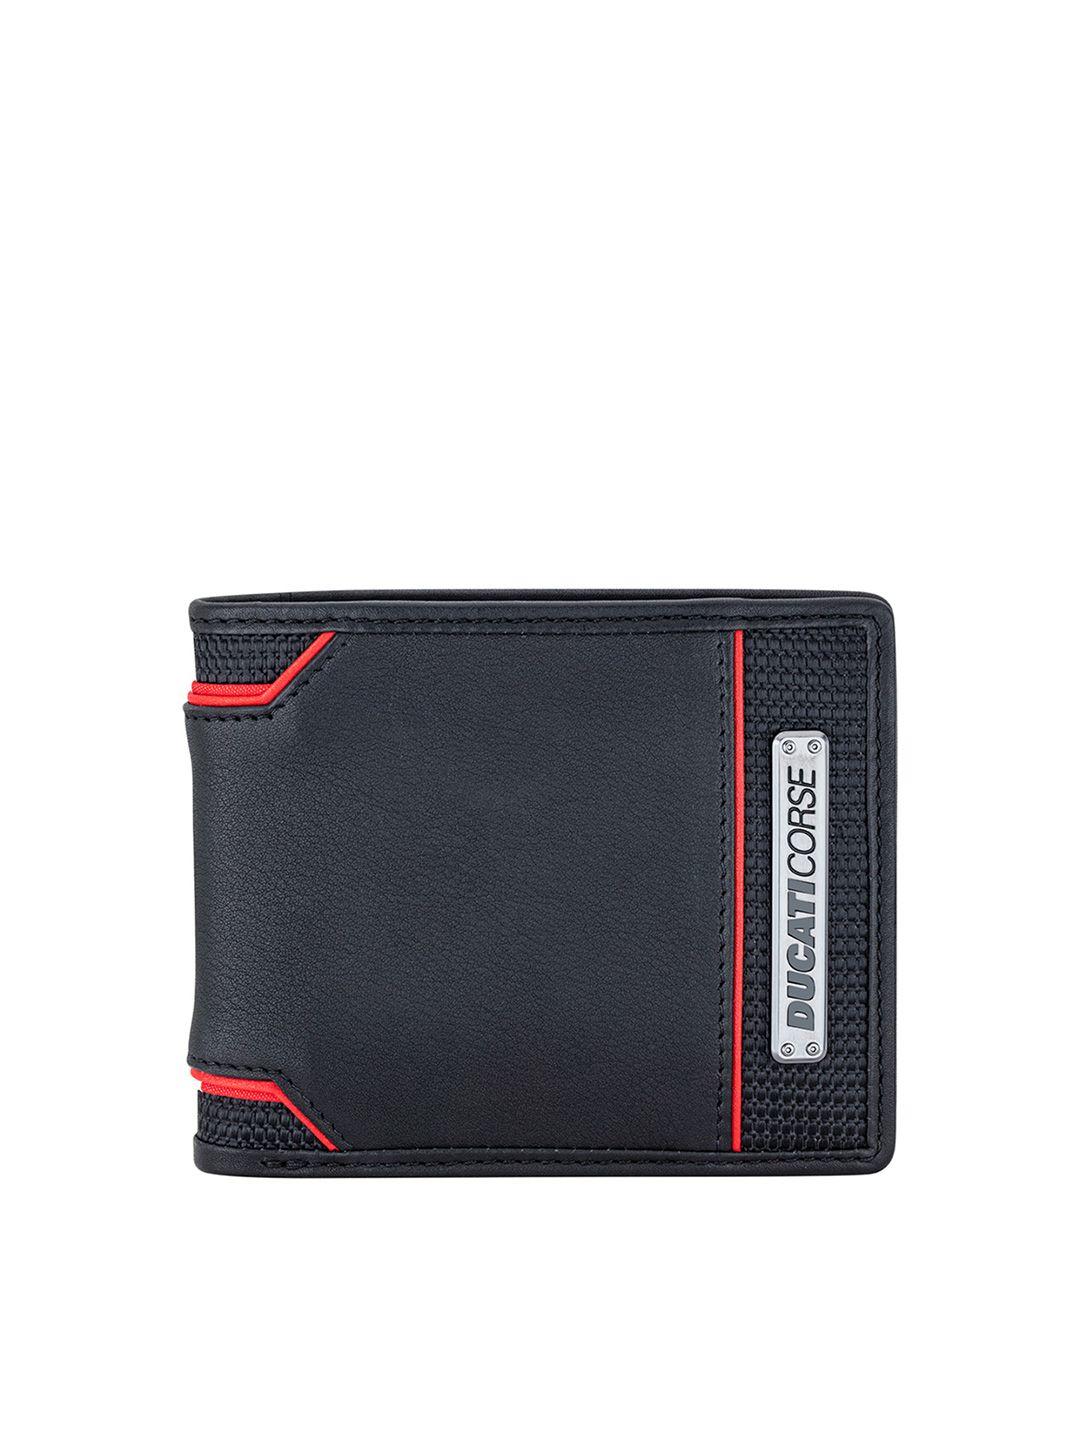 ducati corse men black & red printed leather two fold wallet